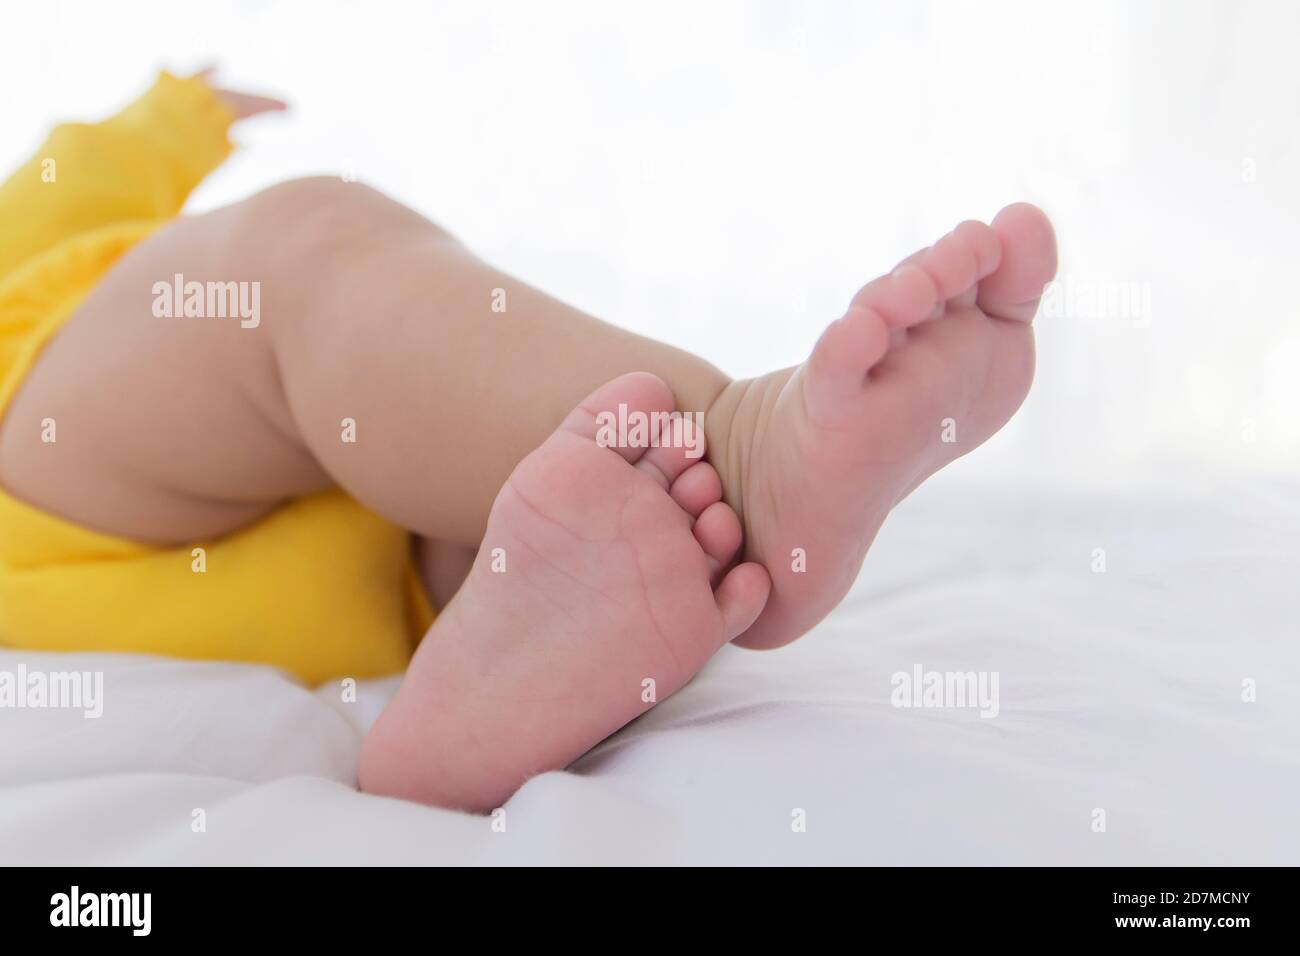 The baby's feet are sleeping in the bed. Stock Photo